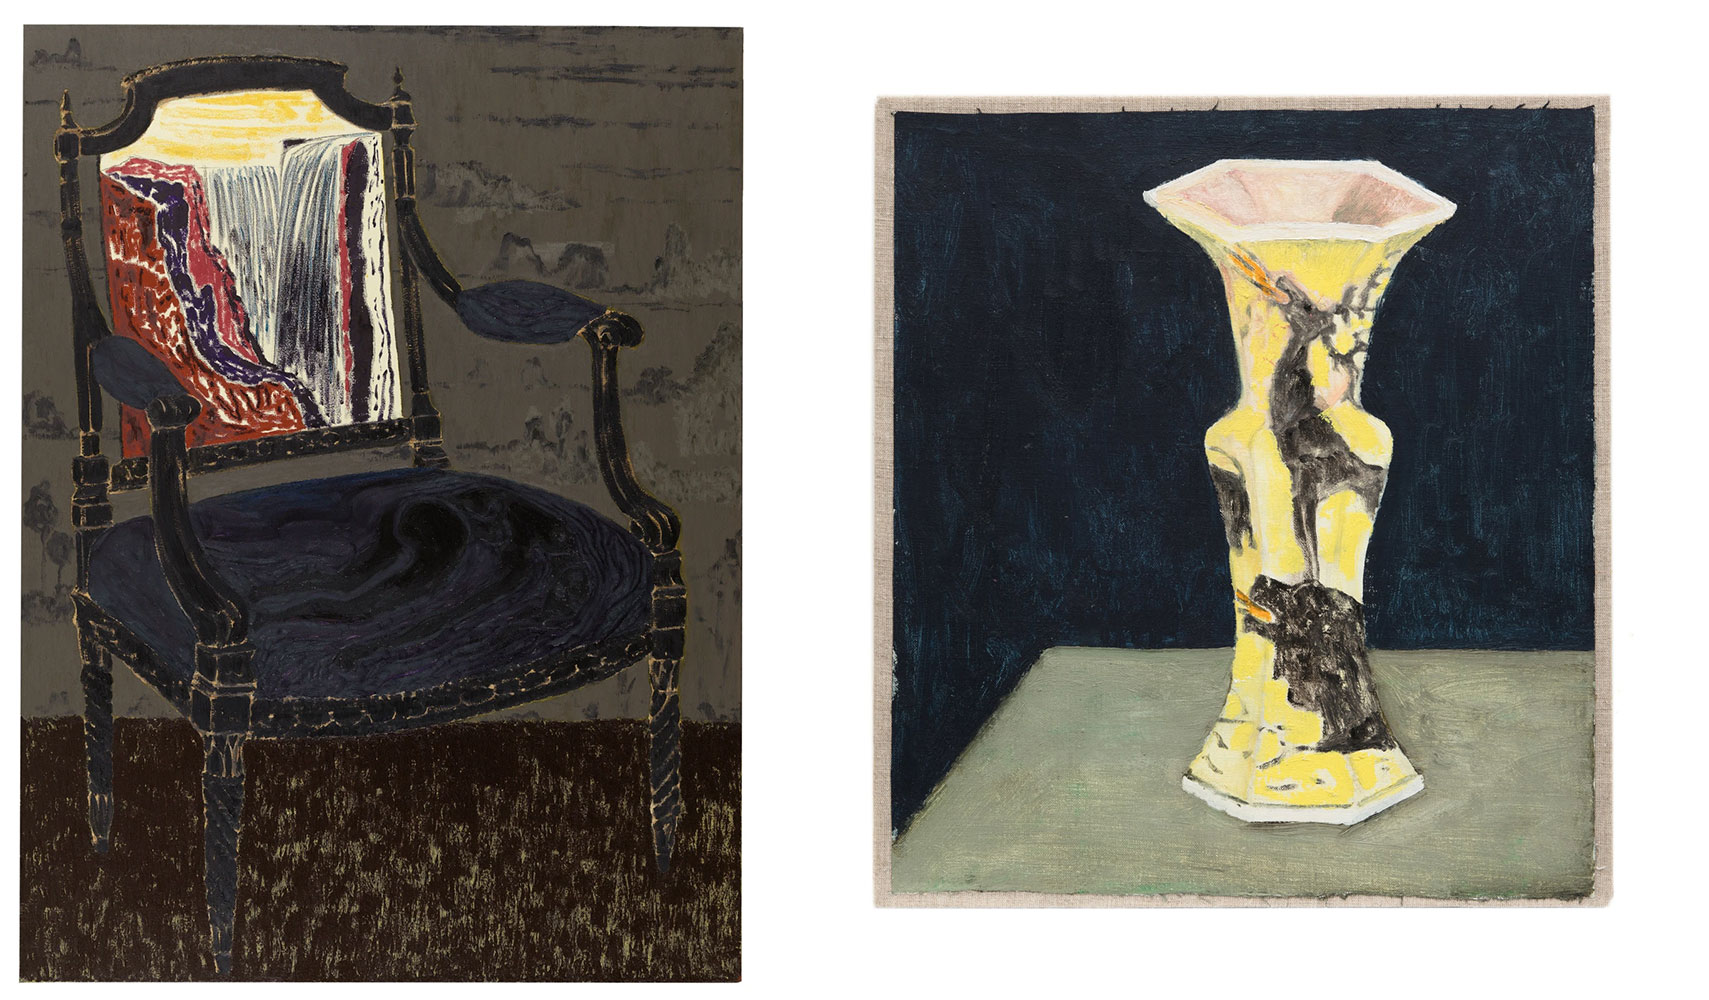 Left: Mamma Andersson, Samtal – Fall / Conversation – Fall, 2022, Oil and acrylic on canvas, 145,5x110 cm, © Mamma Andersson, Courtesy the artist and Galleri Magnus KarlssonRight: Mamma Andersson, Vasen / The Vase, 2022, Oil on canvas, 41,5x37,5 cm, © Mamma Andersson, Courtesy the artist and Galleri Magnus Karlsson 